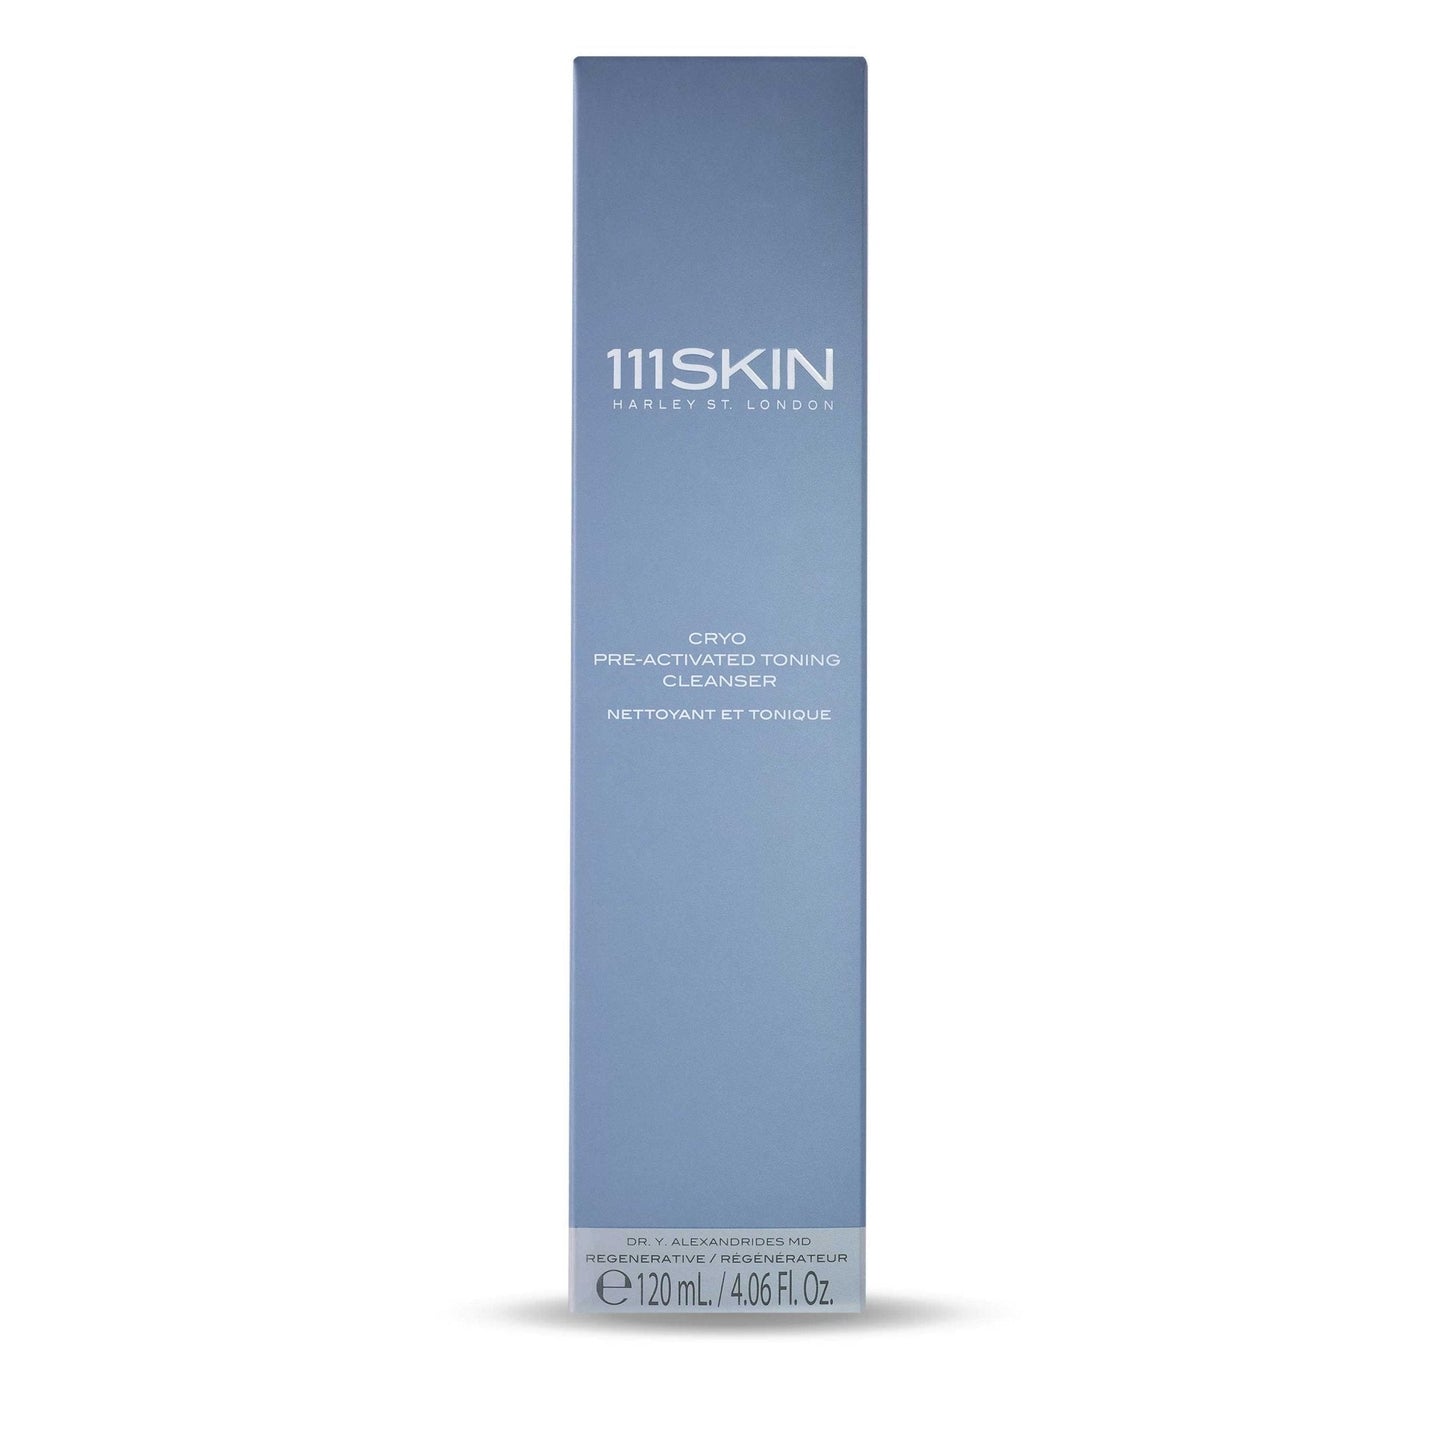 Cryo Pre-Activated Toning Cleanser - 111SKIN